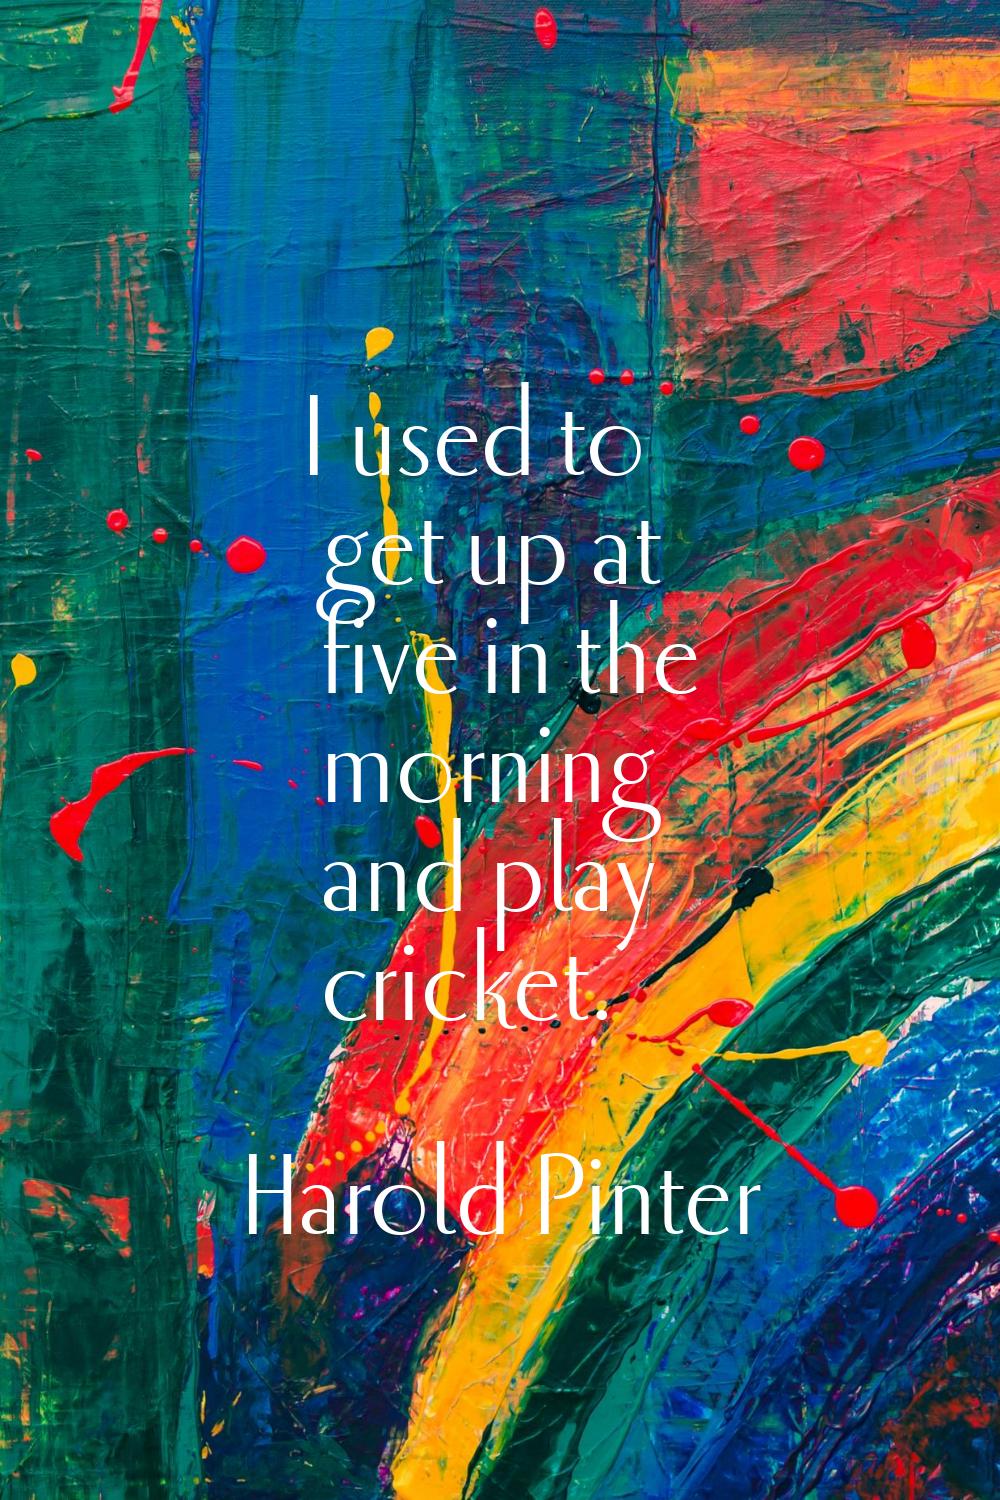 I used to get up at five in the morning and play cricket.